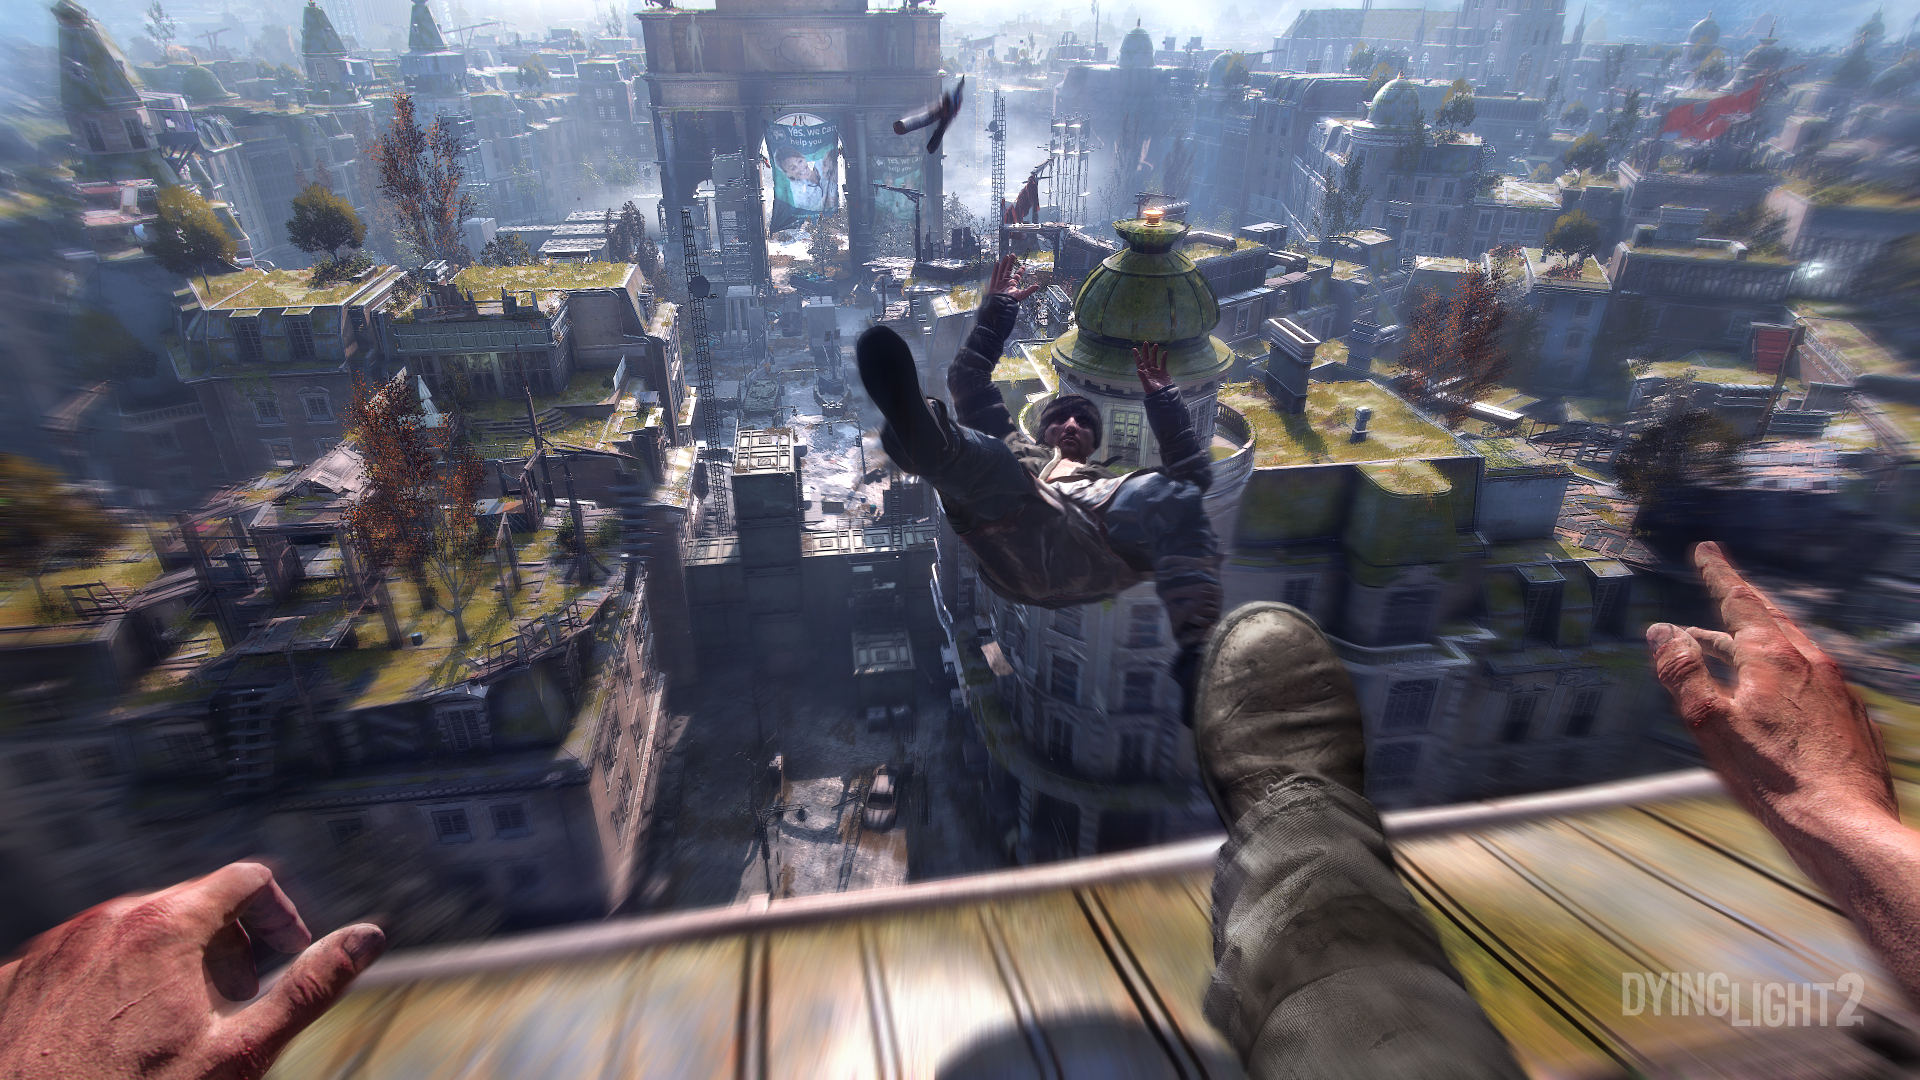 10 games like Dying Light 2 to play once you’re done with Techland’s latest